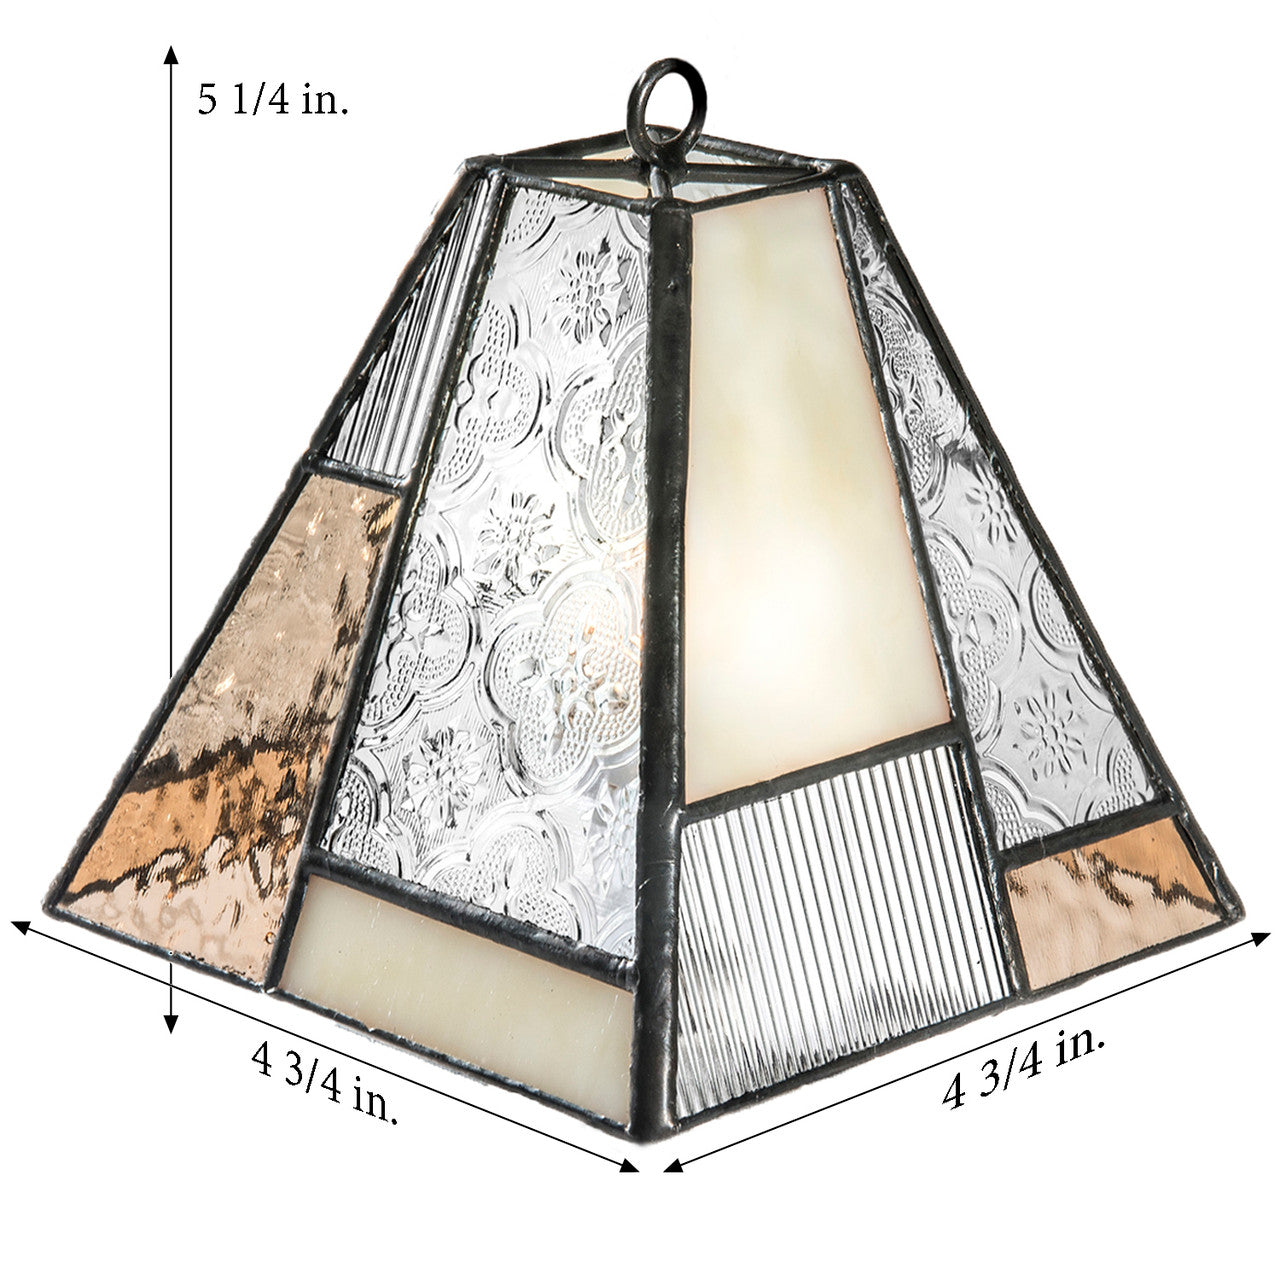 Peach Stained Glass Accent Lamp or Night Light | LAM 710-3